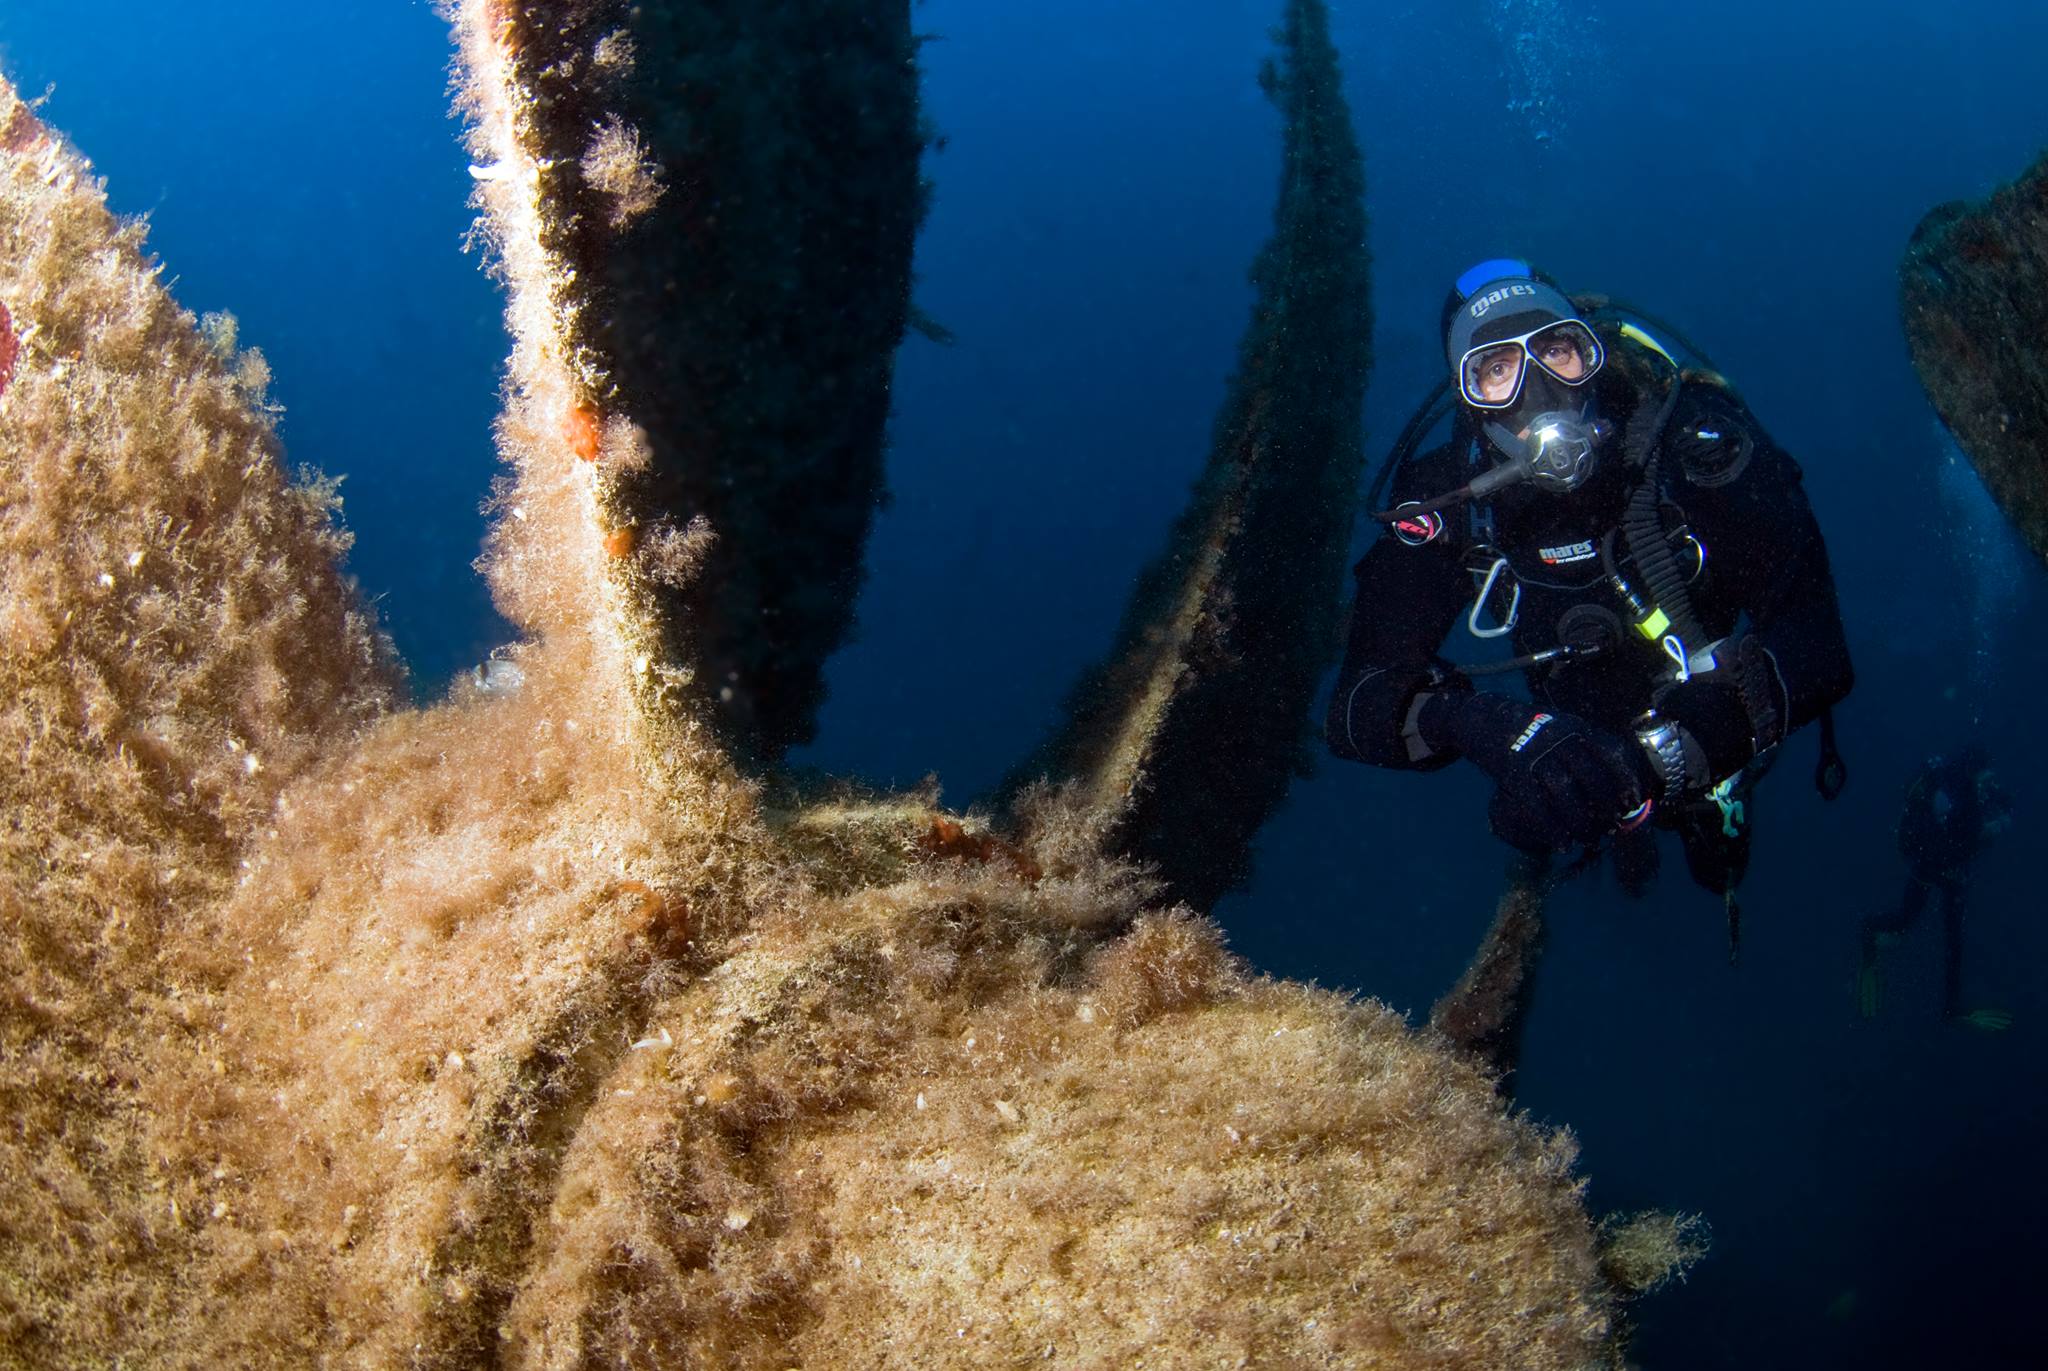 A diver poses next to a boat propeller underwater